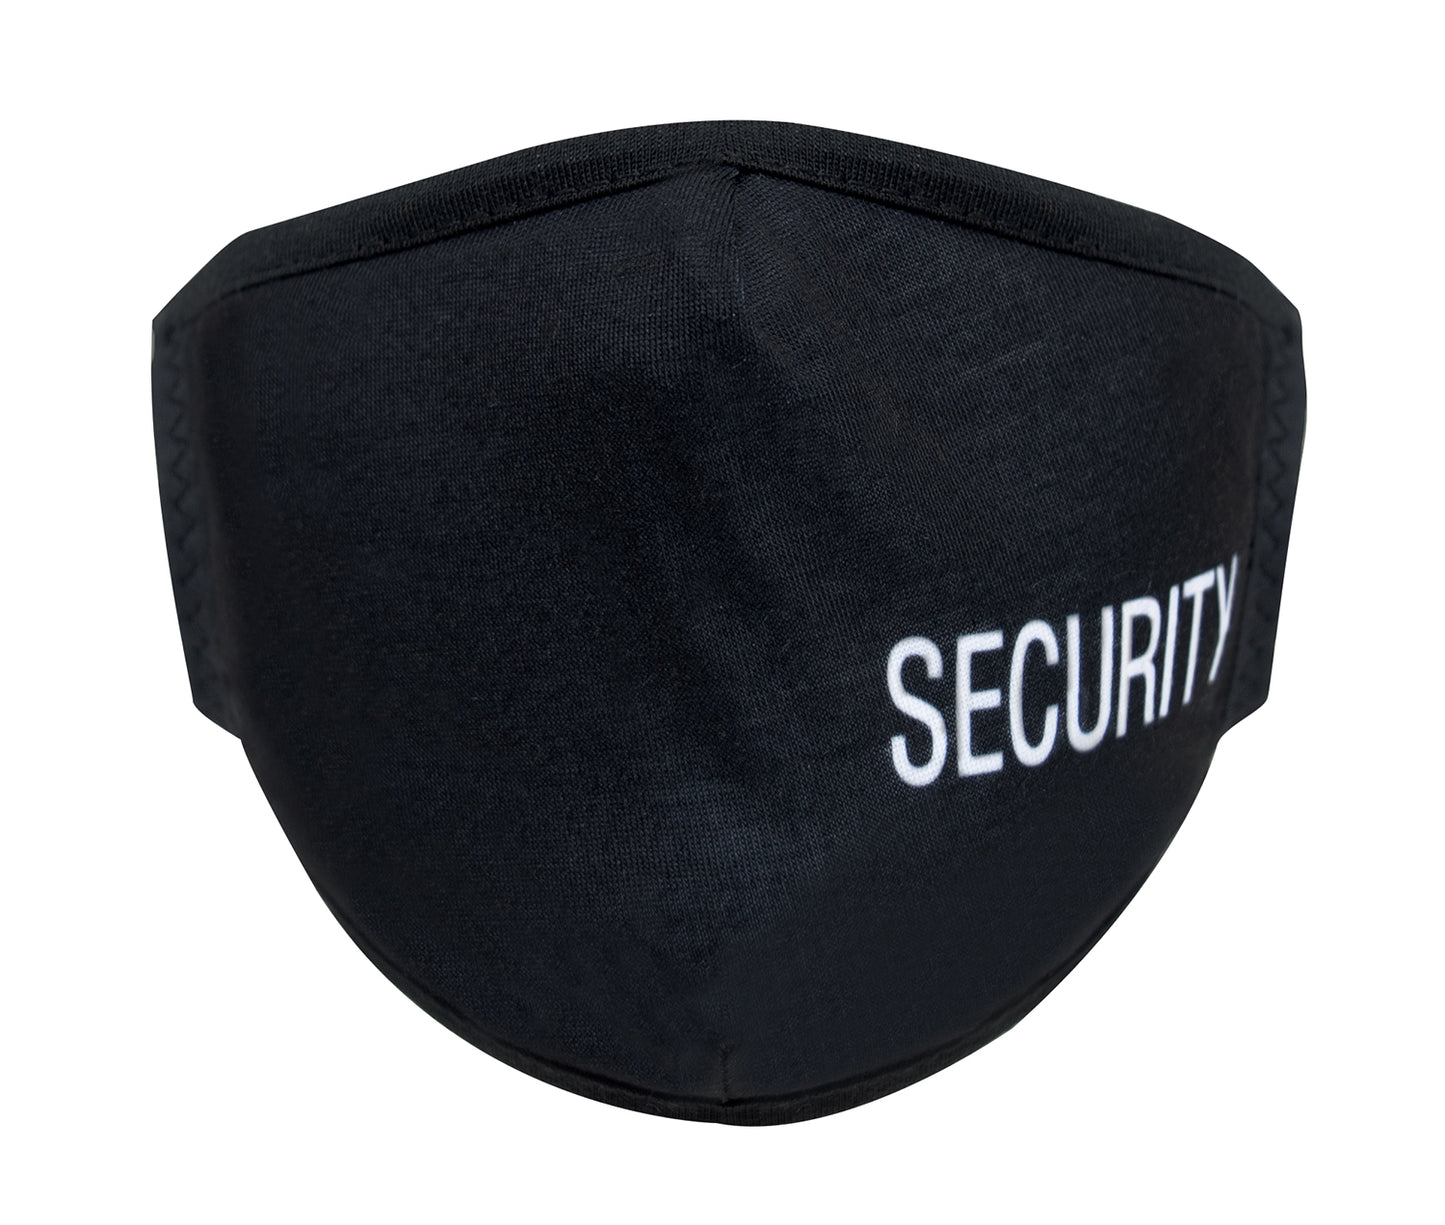 Rothco Reusable 3 Layer Facemask With Security Print